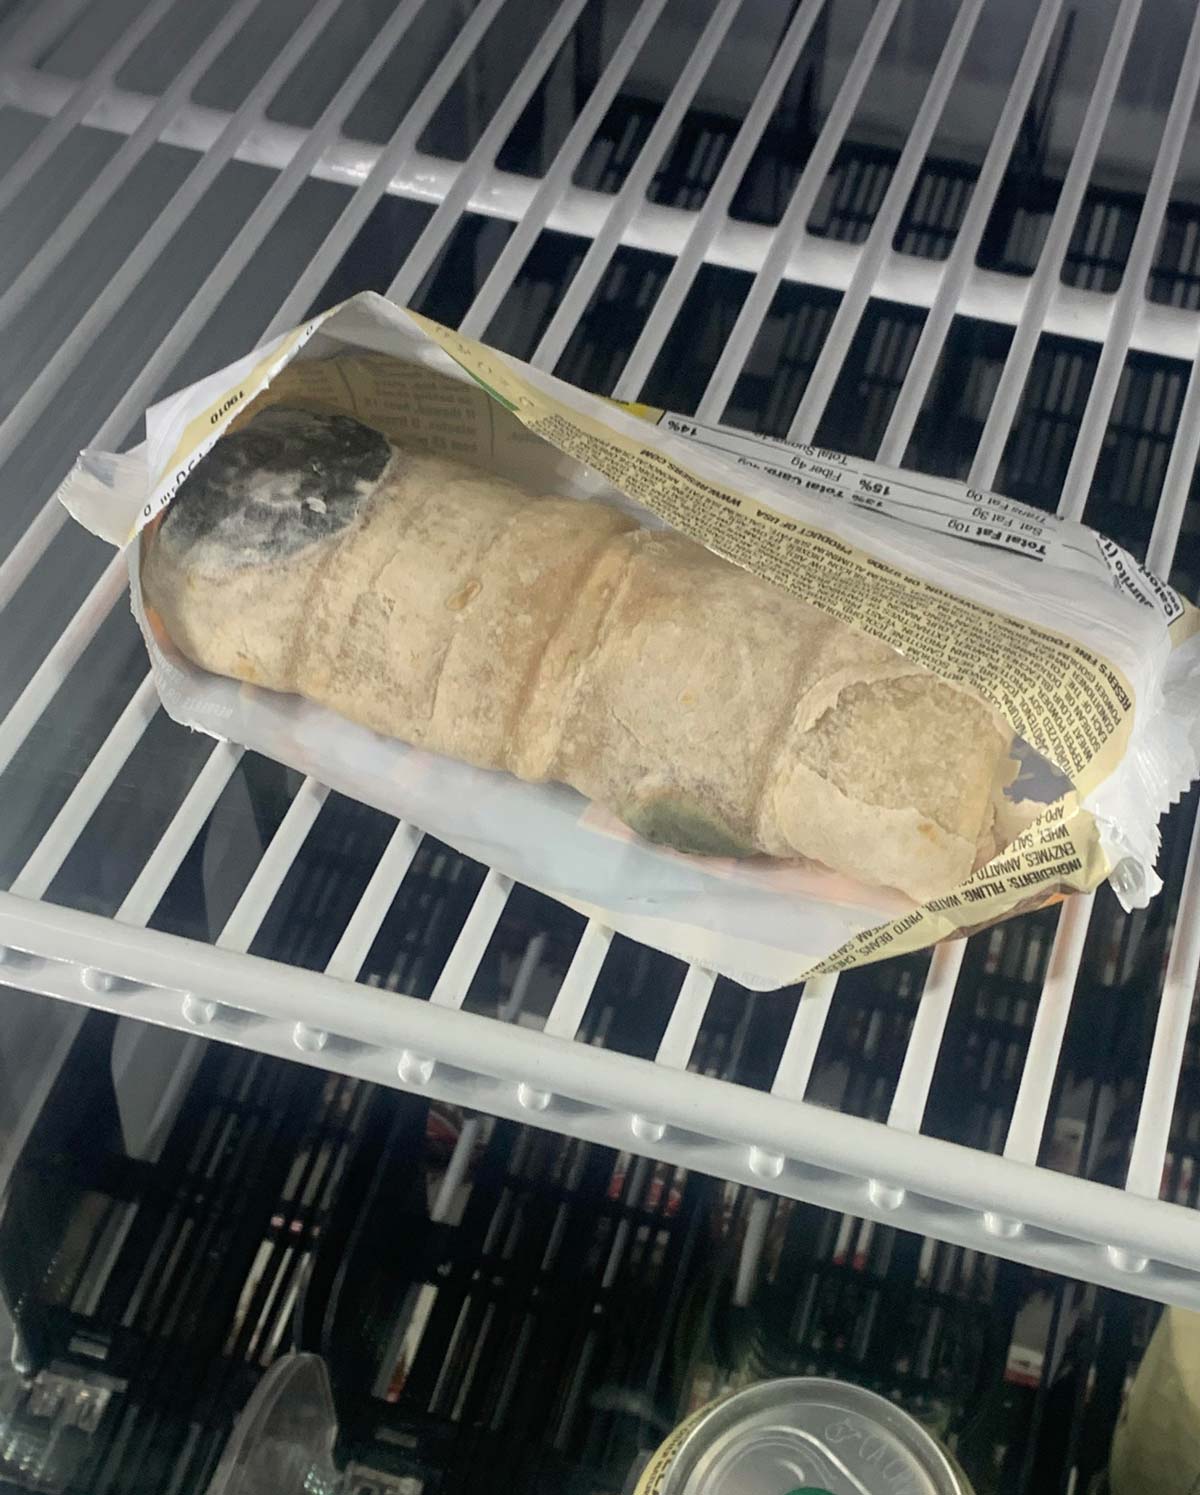 A burrito that was in my works fridge, the way it molded made it look like a giant's toe